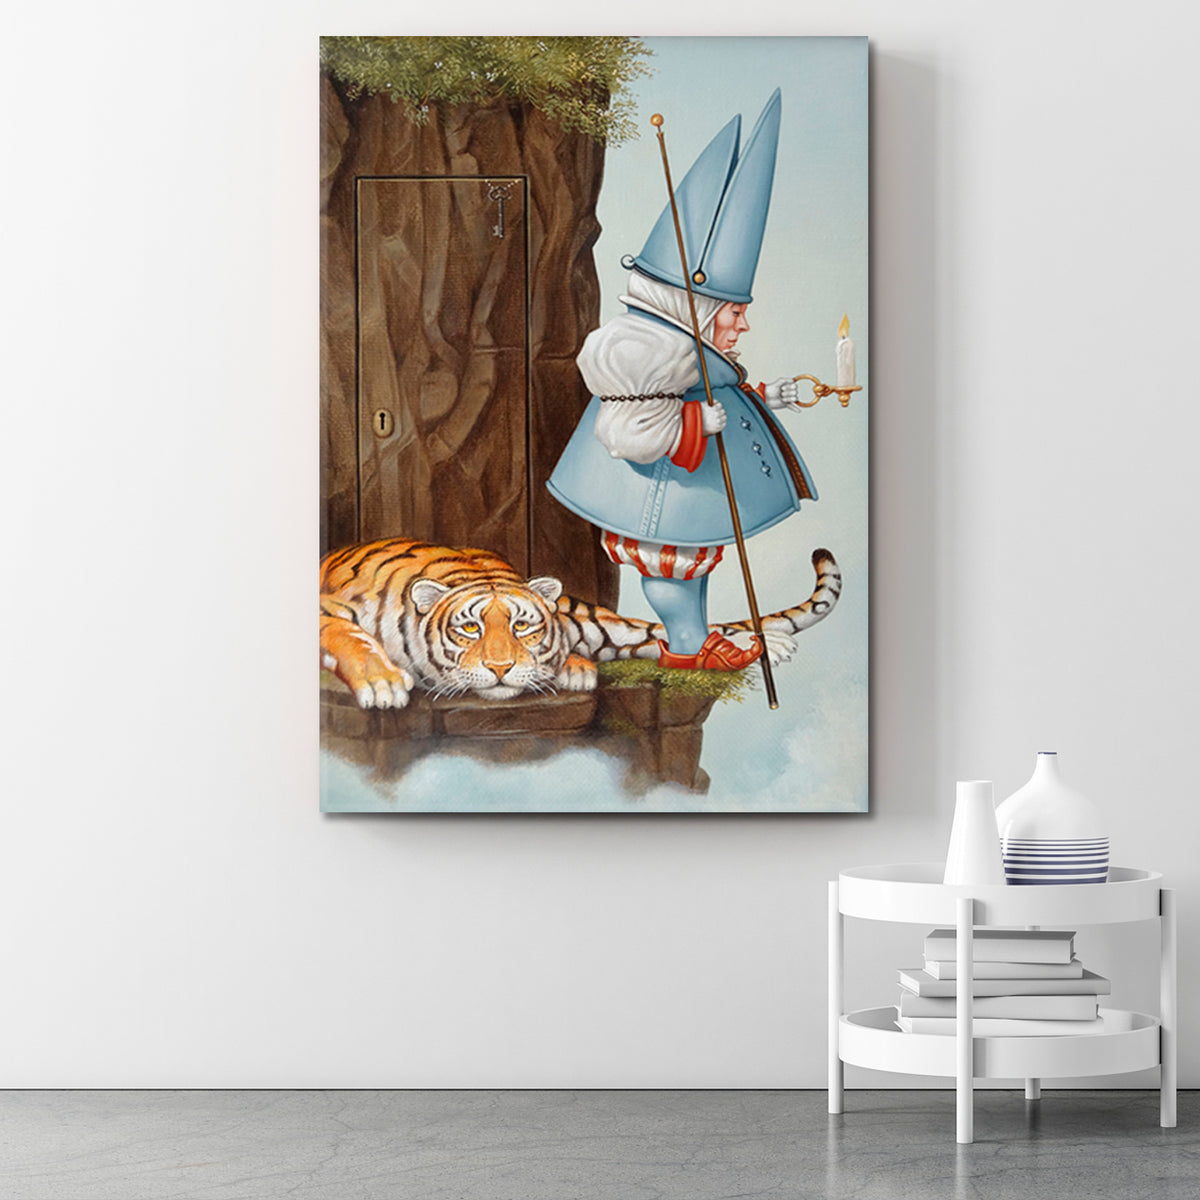 SECRET DOOR Gnome With Candle & Tiger Surrealistic Painting Surreal Fantasy Large Art Print Décor Artesty 1 Panel 16"x24" 